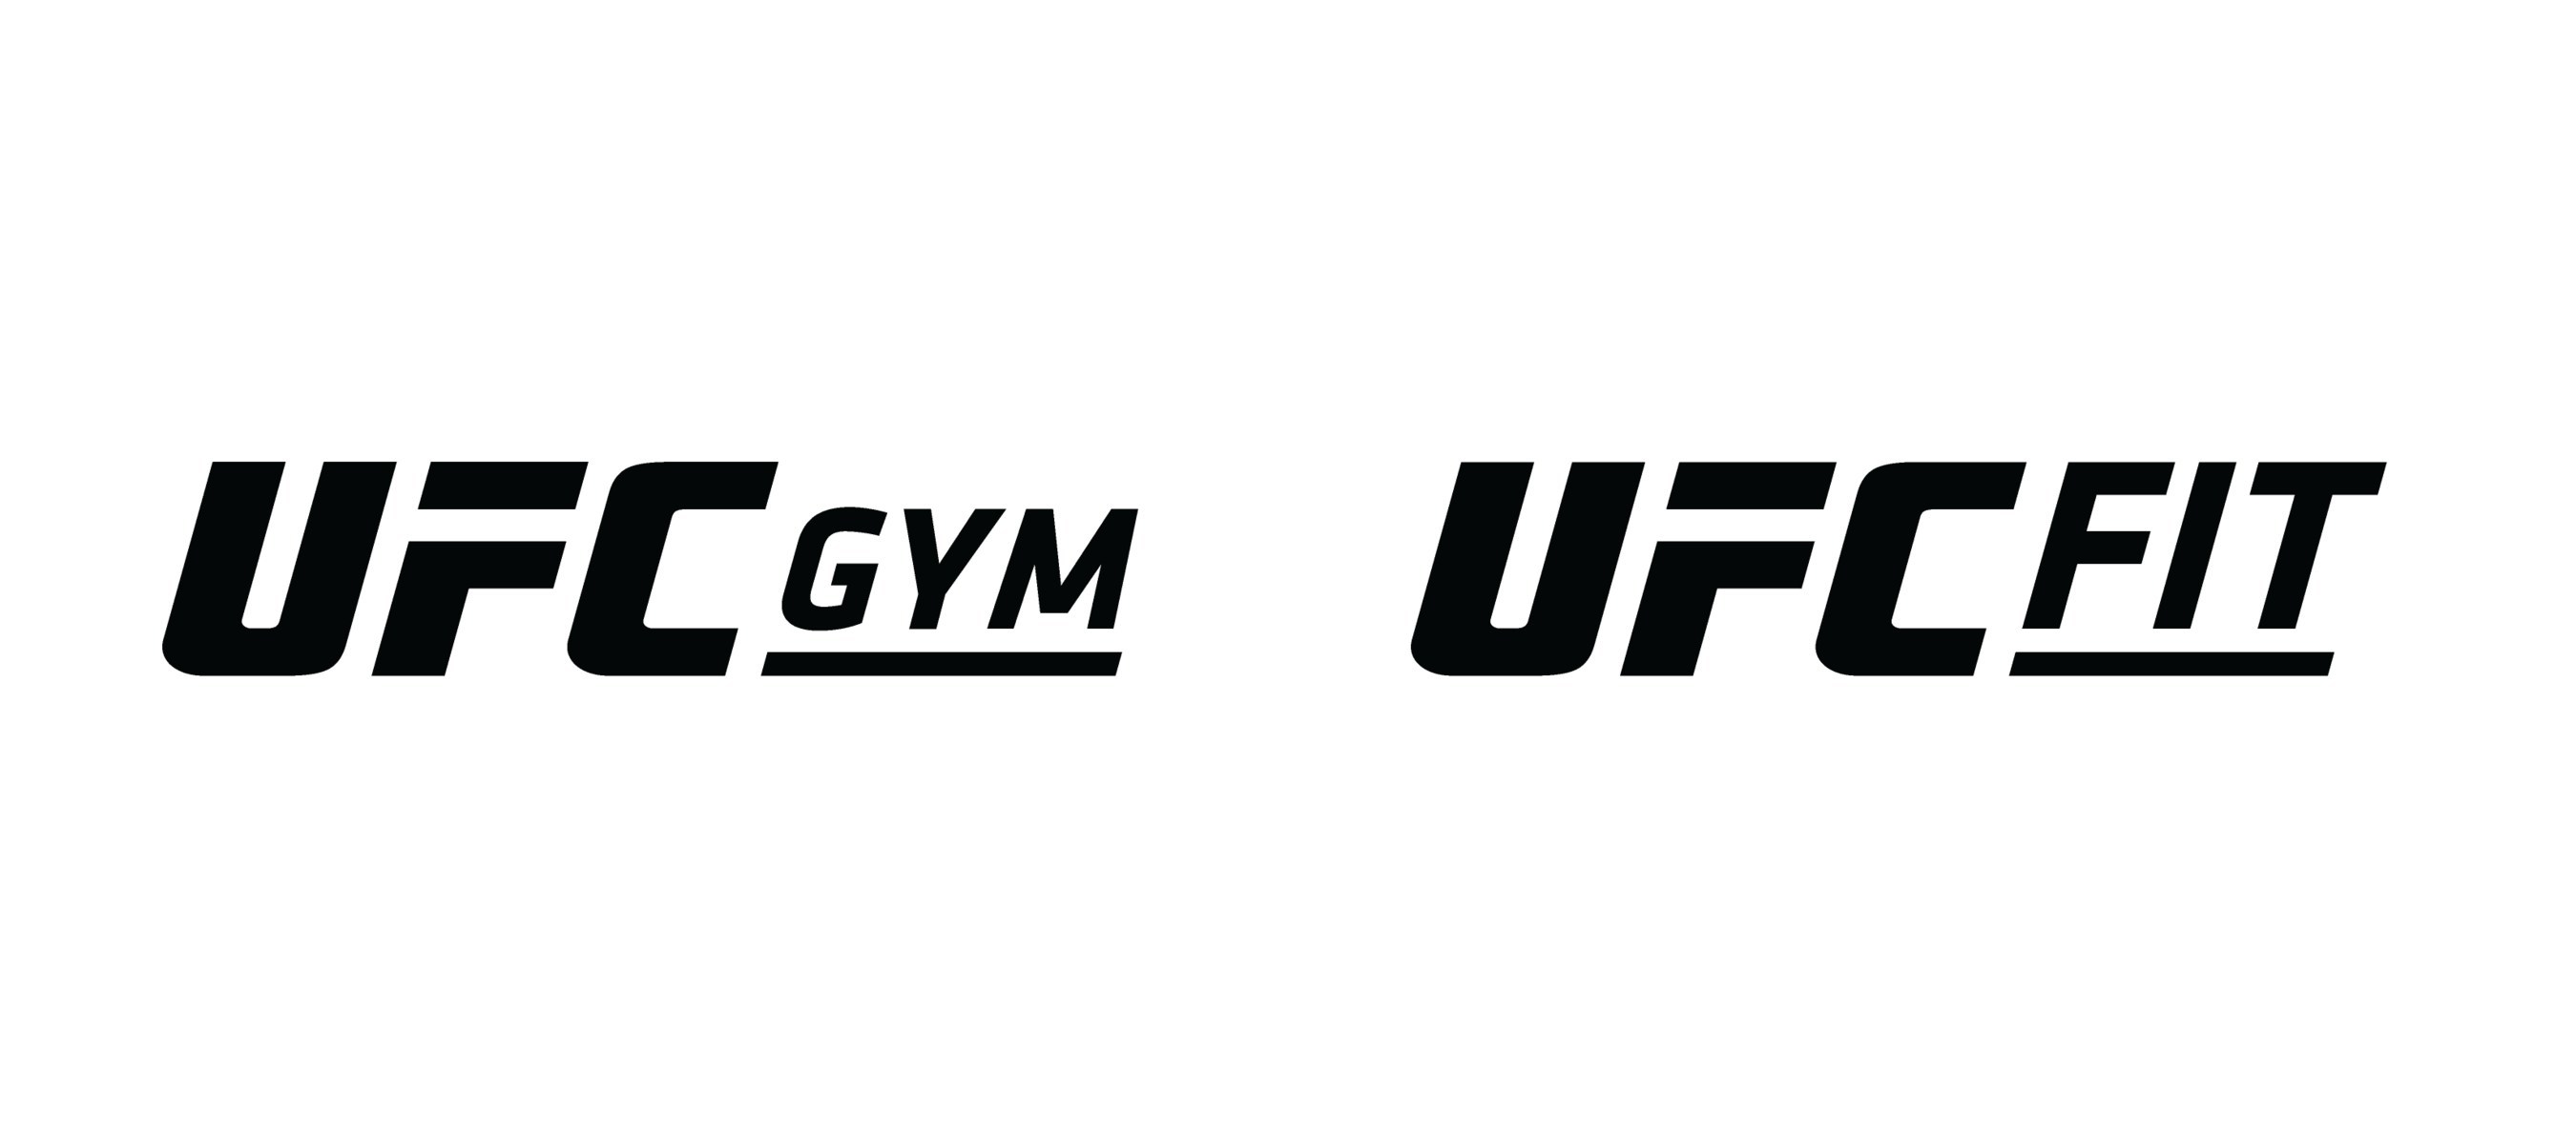 UFC GYM® and UFC FIT® to Build Off Milestone Year in 2022 and Projects